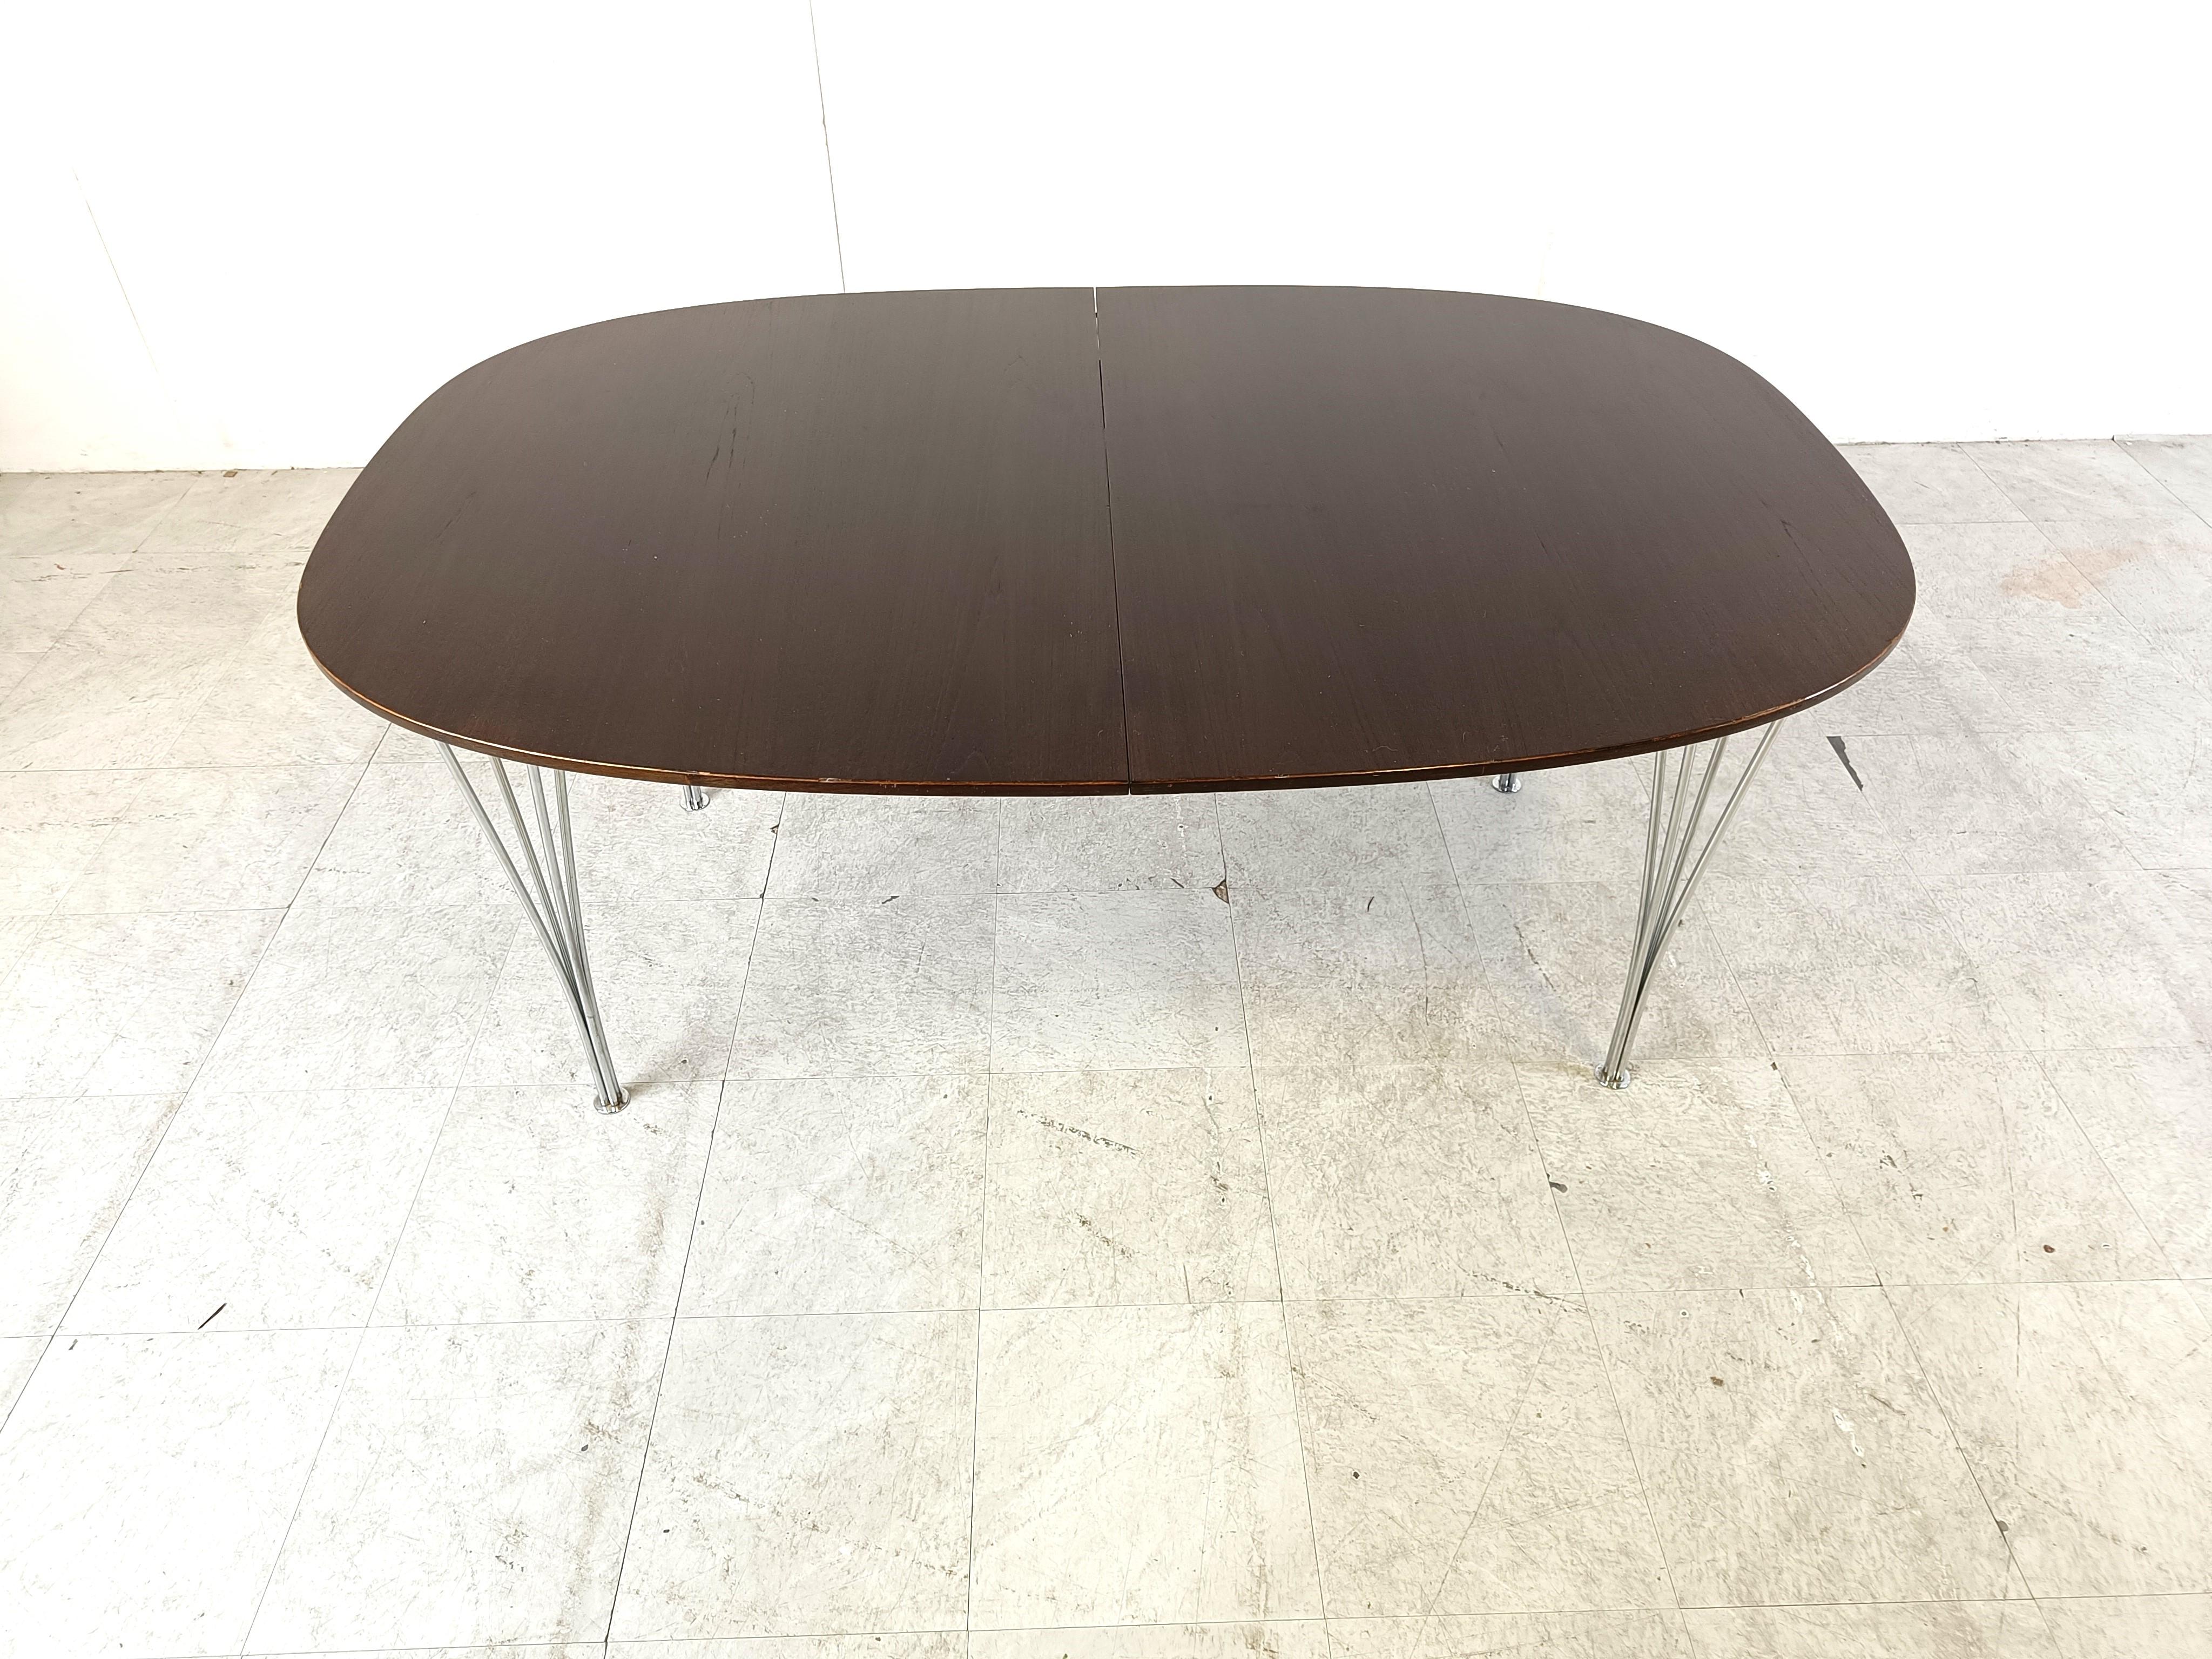 Vintage elliptical dining table model 7412 designed by Piet Hein and Bruno Mathsson for Fritz Hansen.

The table is extendable thanks to two extra table tops.

Fine and elegant metal wire legs.

Stamped underneath the table top with the makers mark